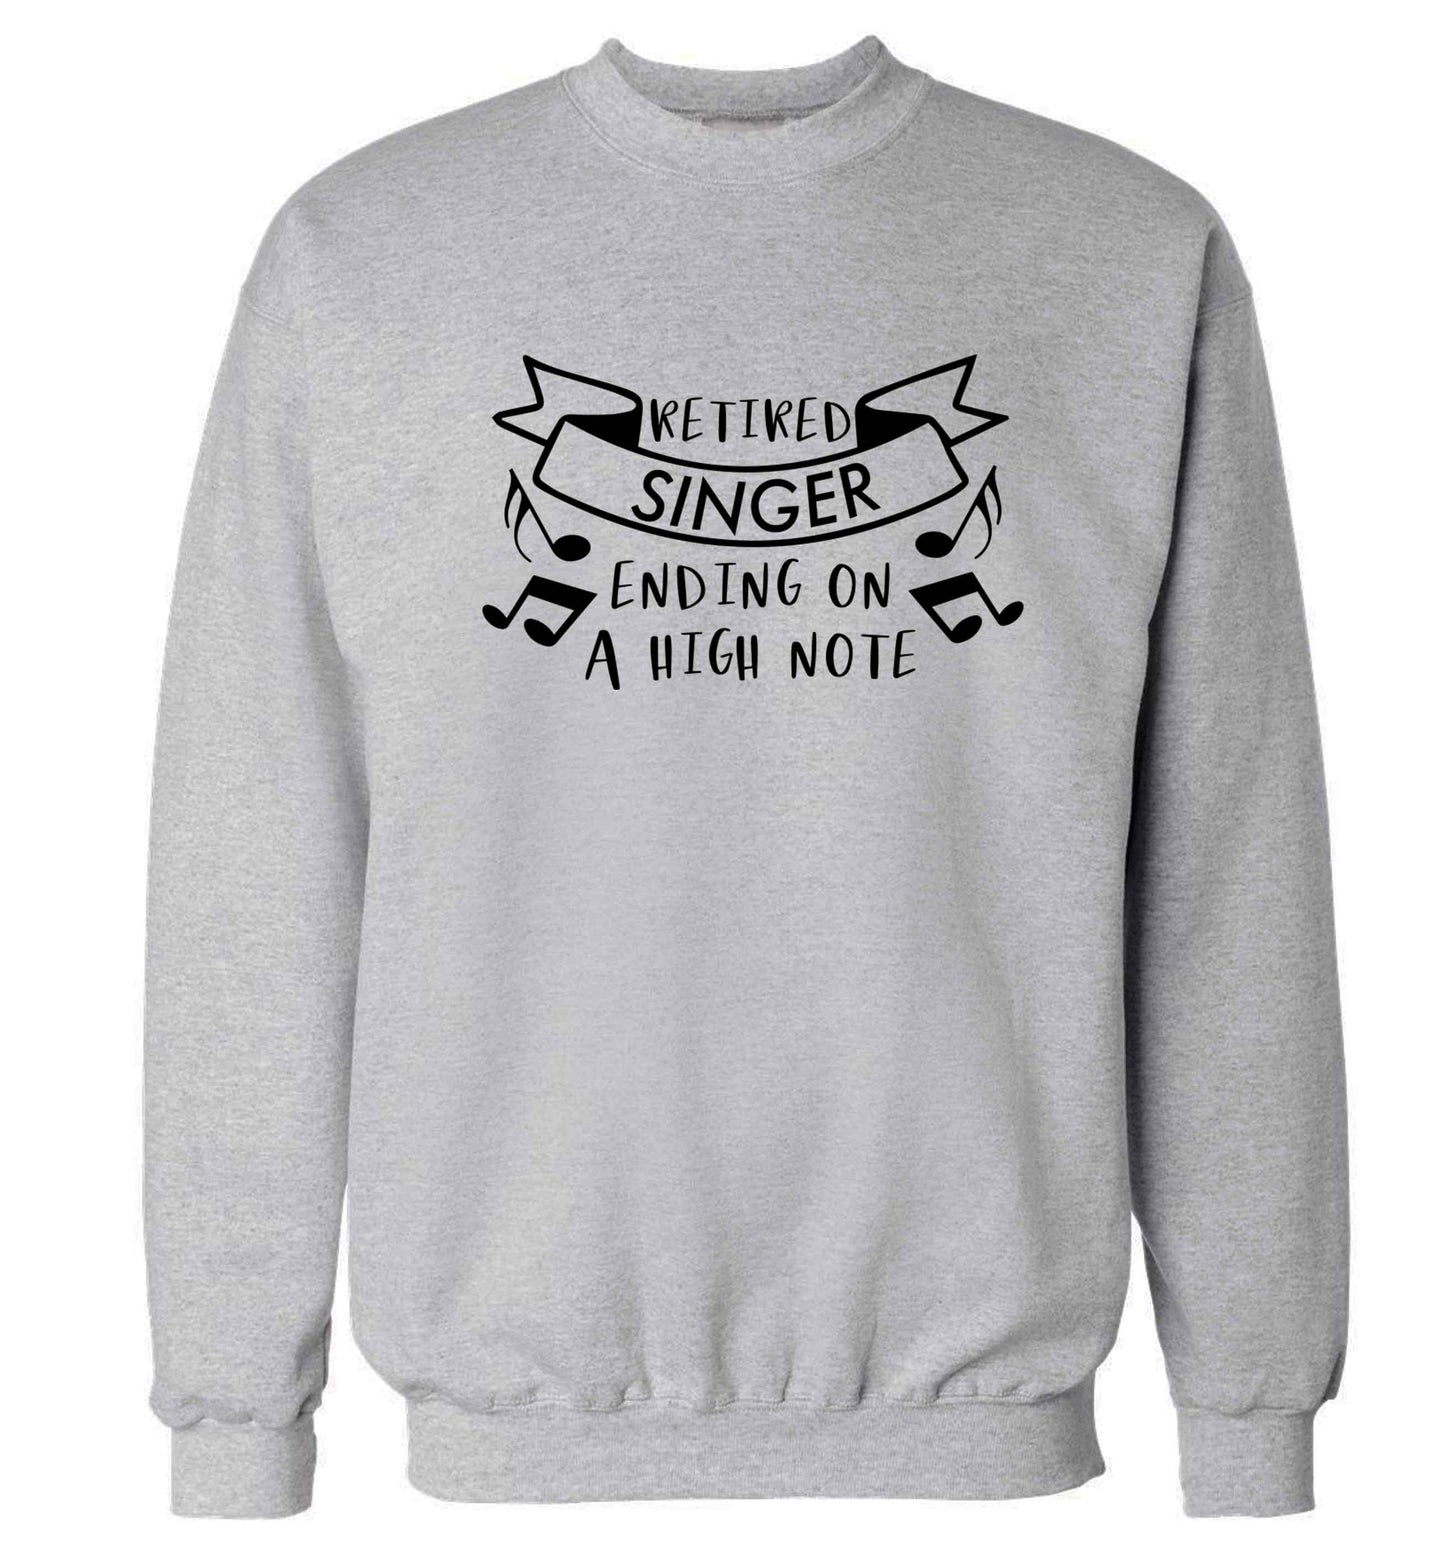 Retired singer ending on a high note Adult's unisex grey Sweater 2XL